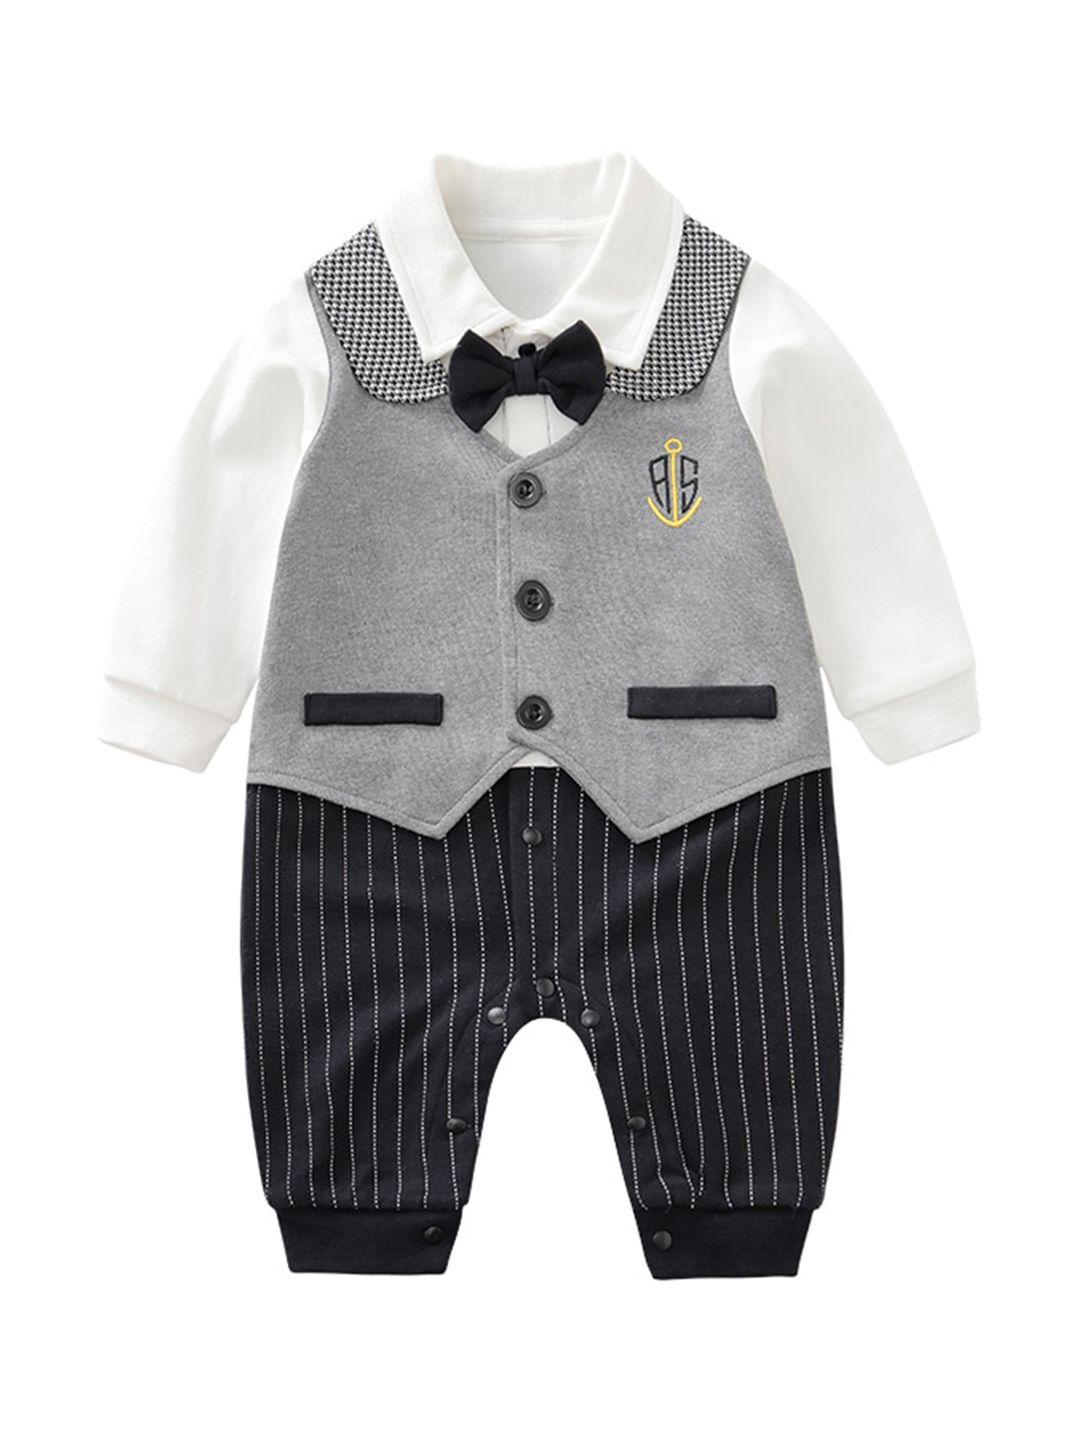 stylecast-infant-boys-striped-cotton-rompers